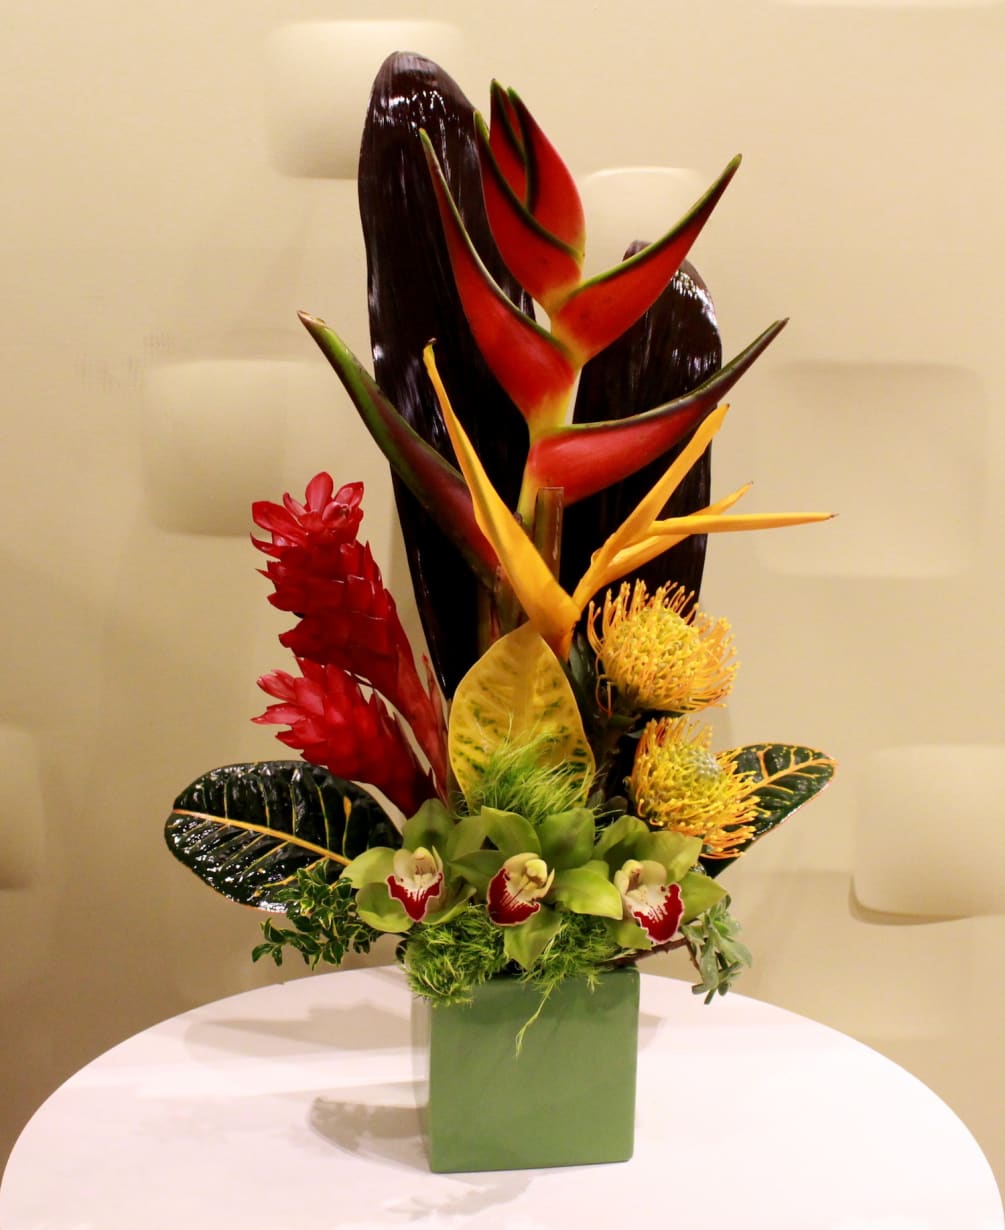 Exquisite Tropical Design with Heliconia,Red Ginger,Proteas,and Green Orchids.
